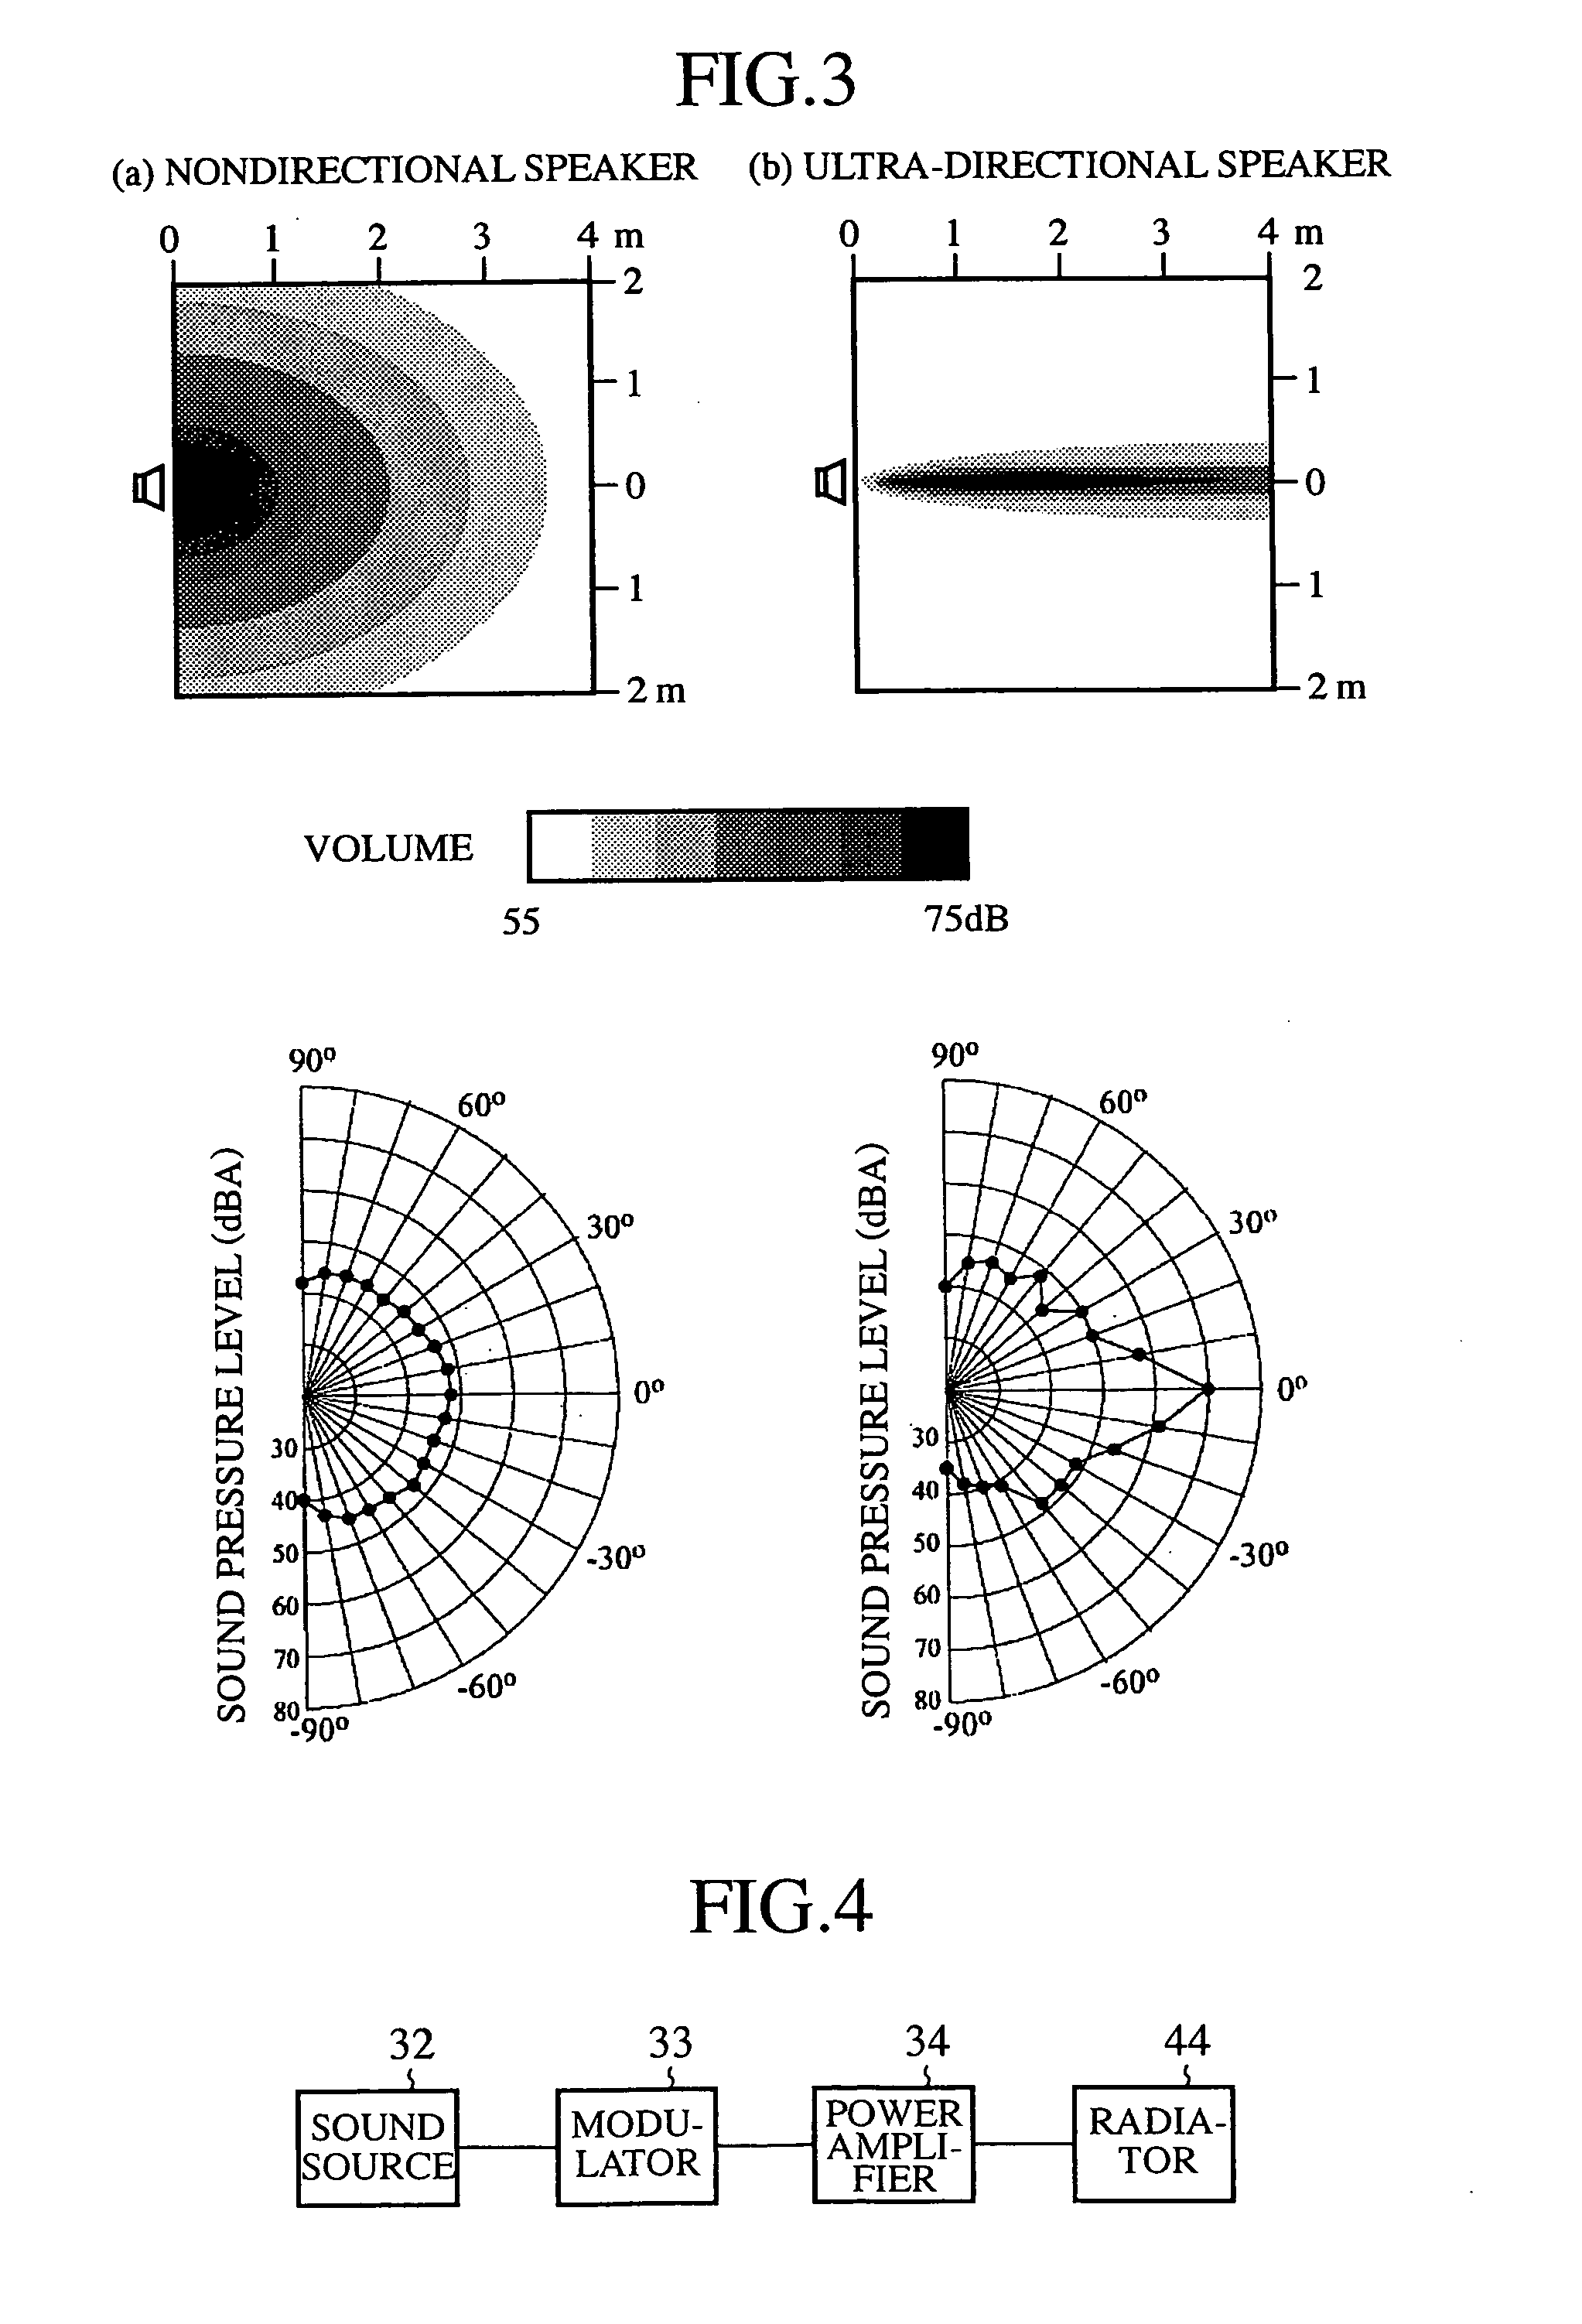 Moving object equipped with ultra-directional speaker